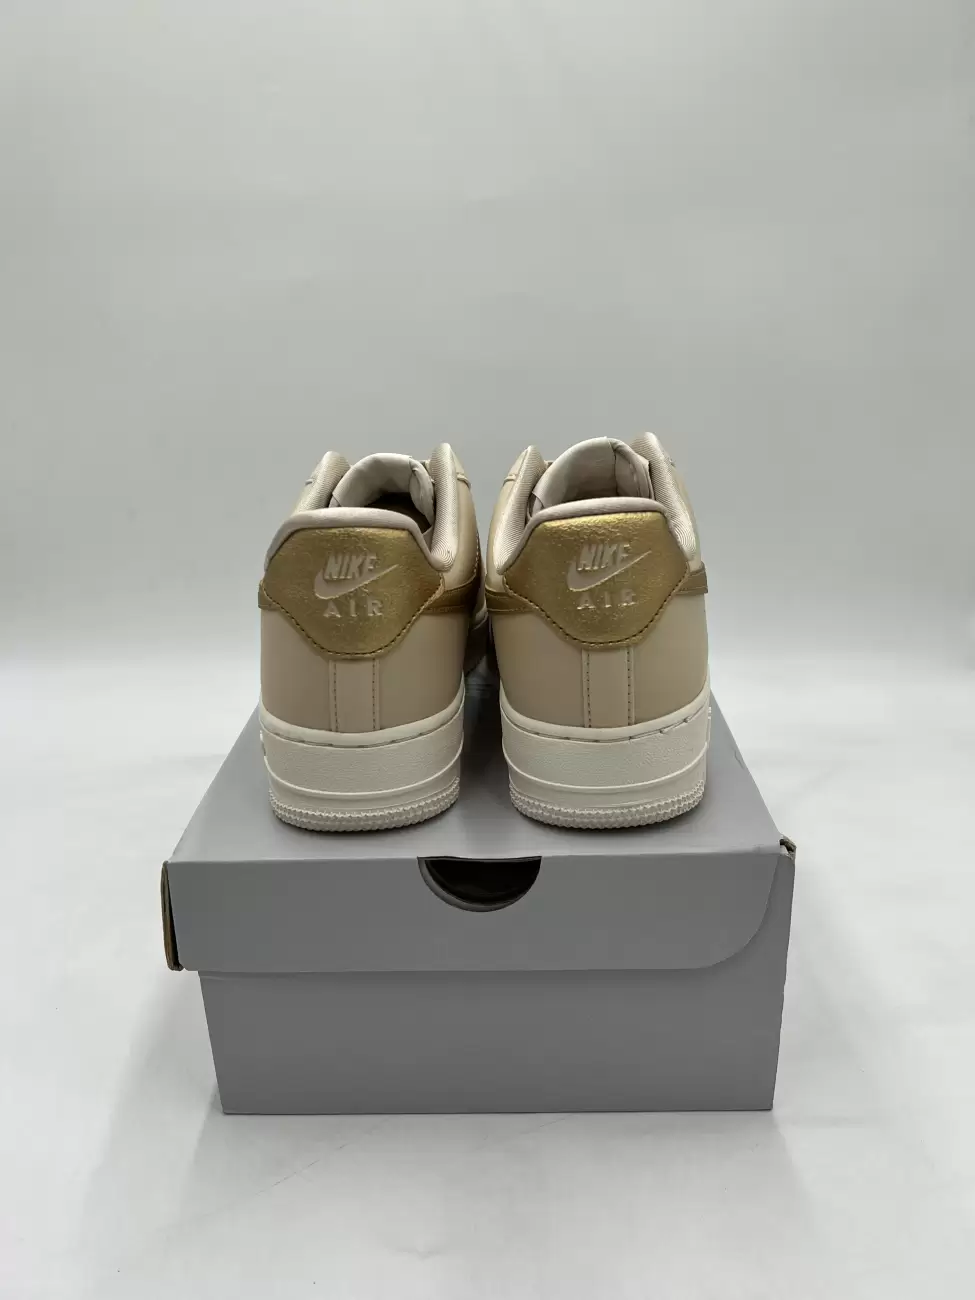 Size 9 - Nike Air Force 1 '07 LV8 EMB Cracked Leather 2023